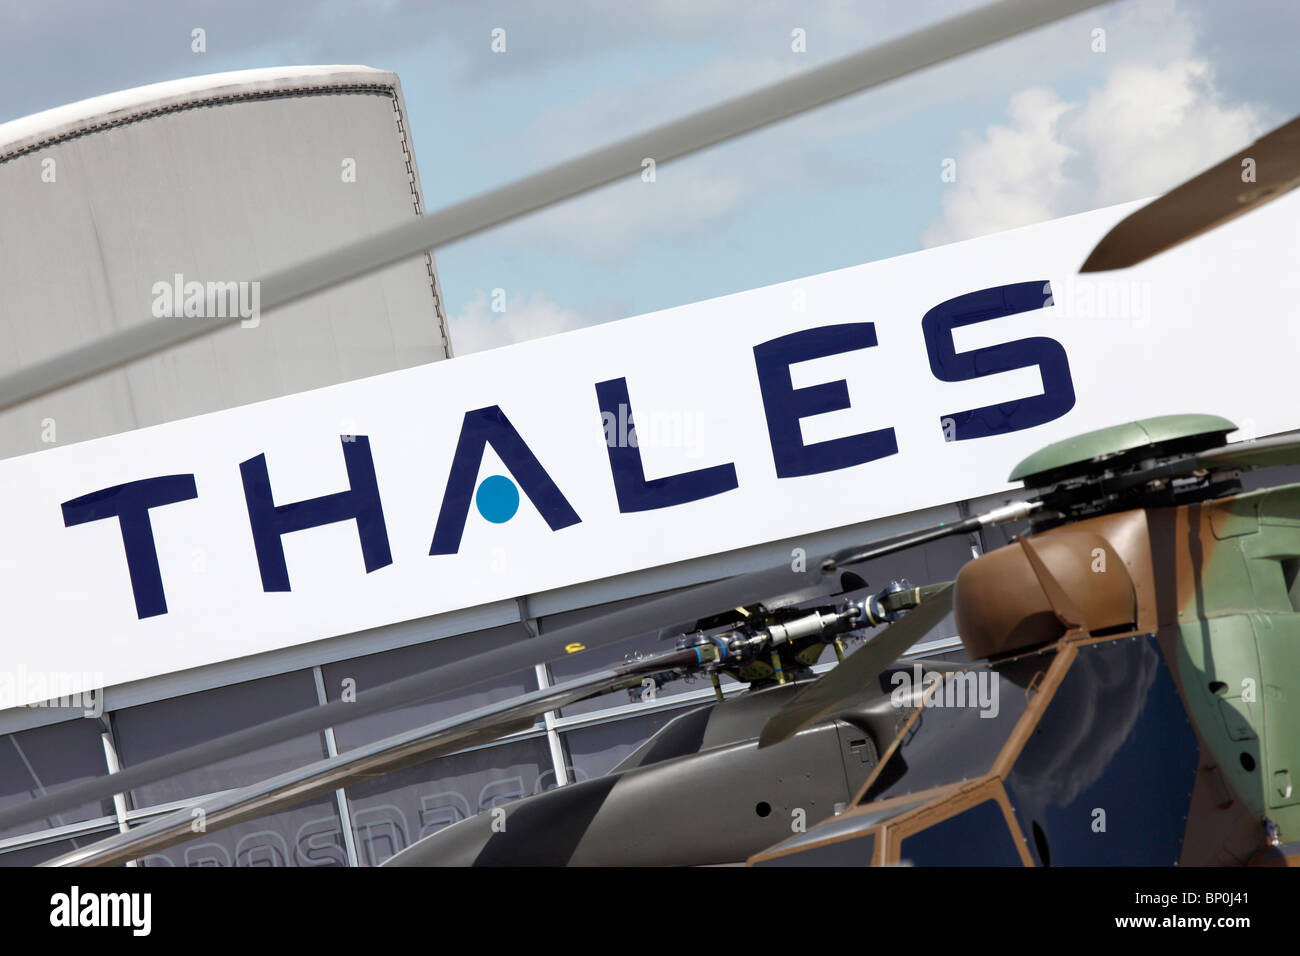 Helicopter, Thales sign Stock Photo